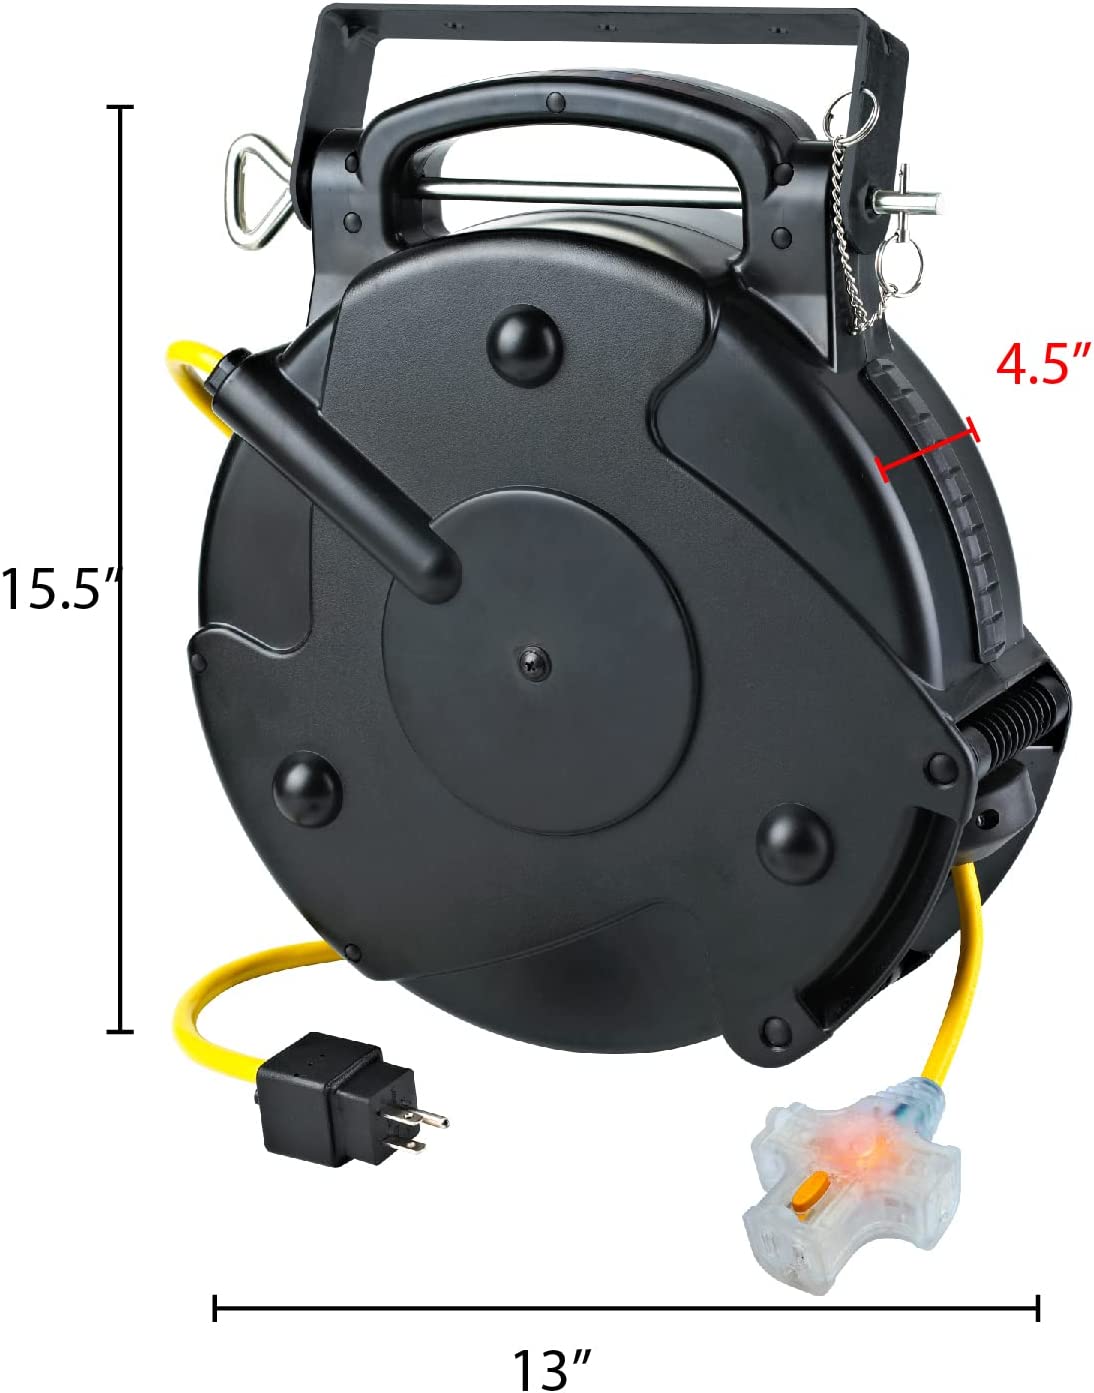 Shop Retractable Extension Cord | Cord Reel with Locking Outlet, Black - E.S.N Tools